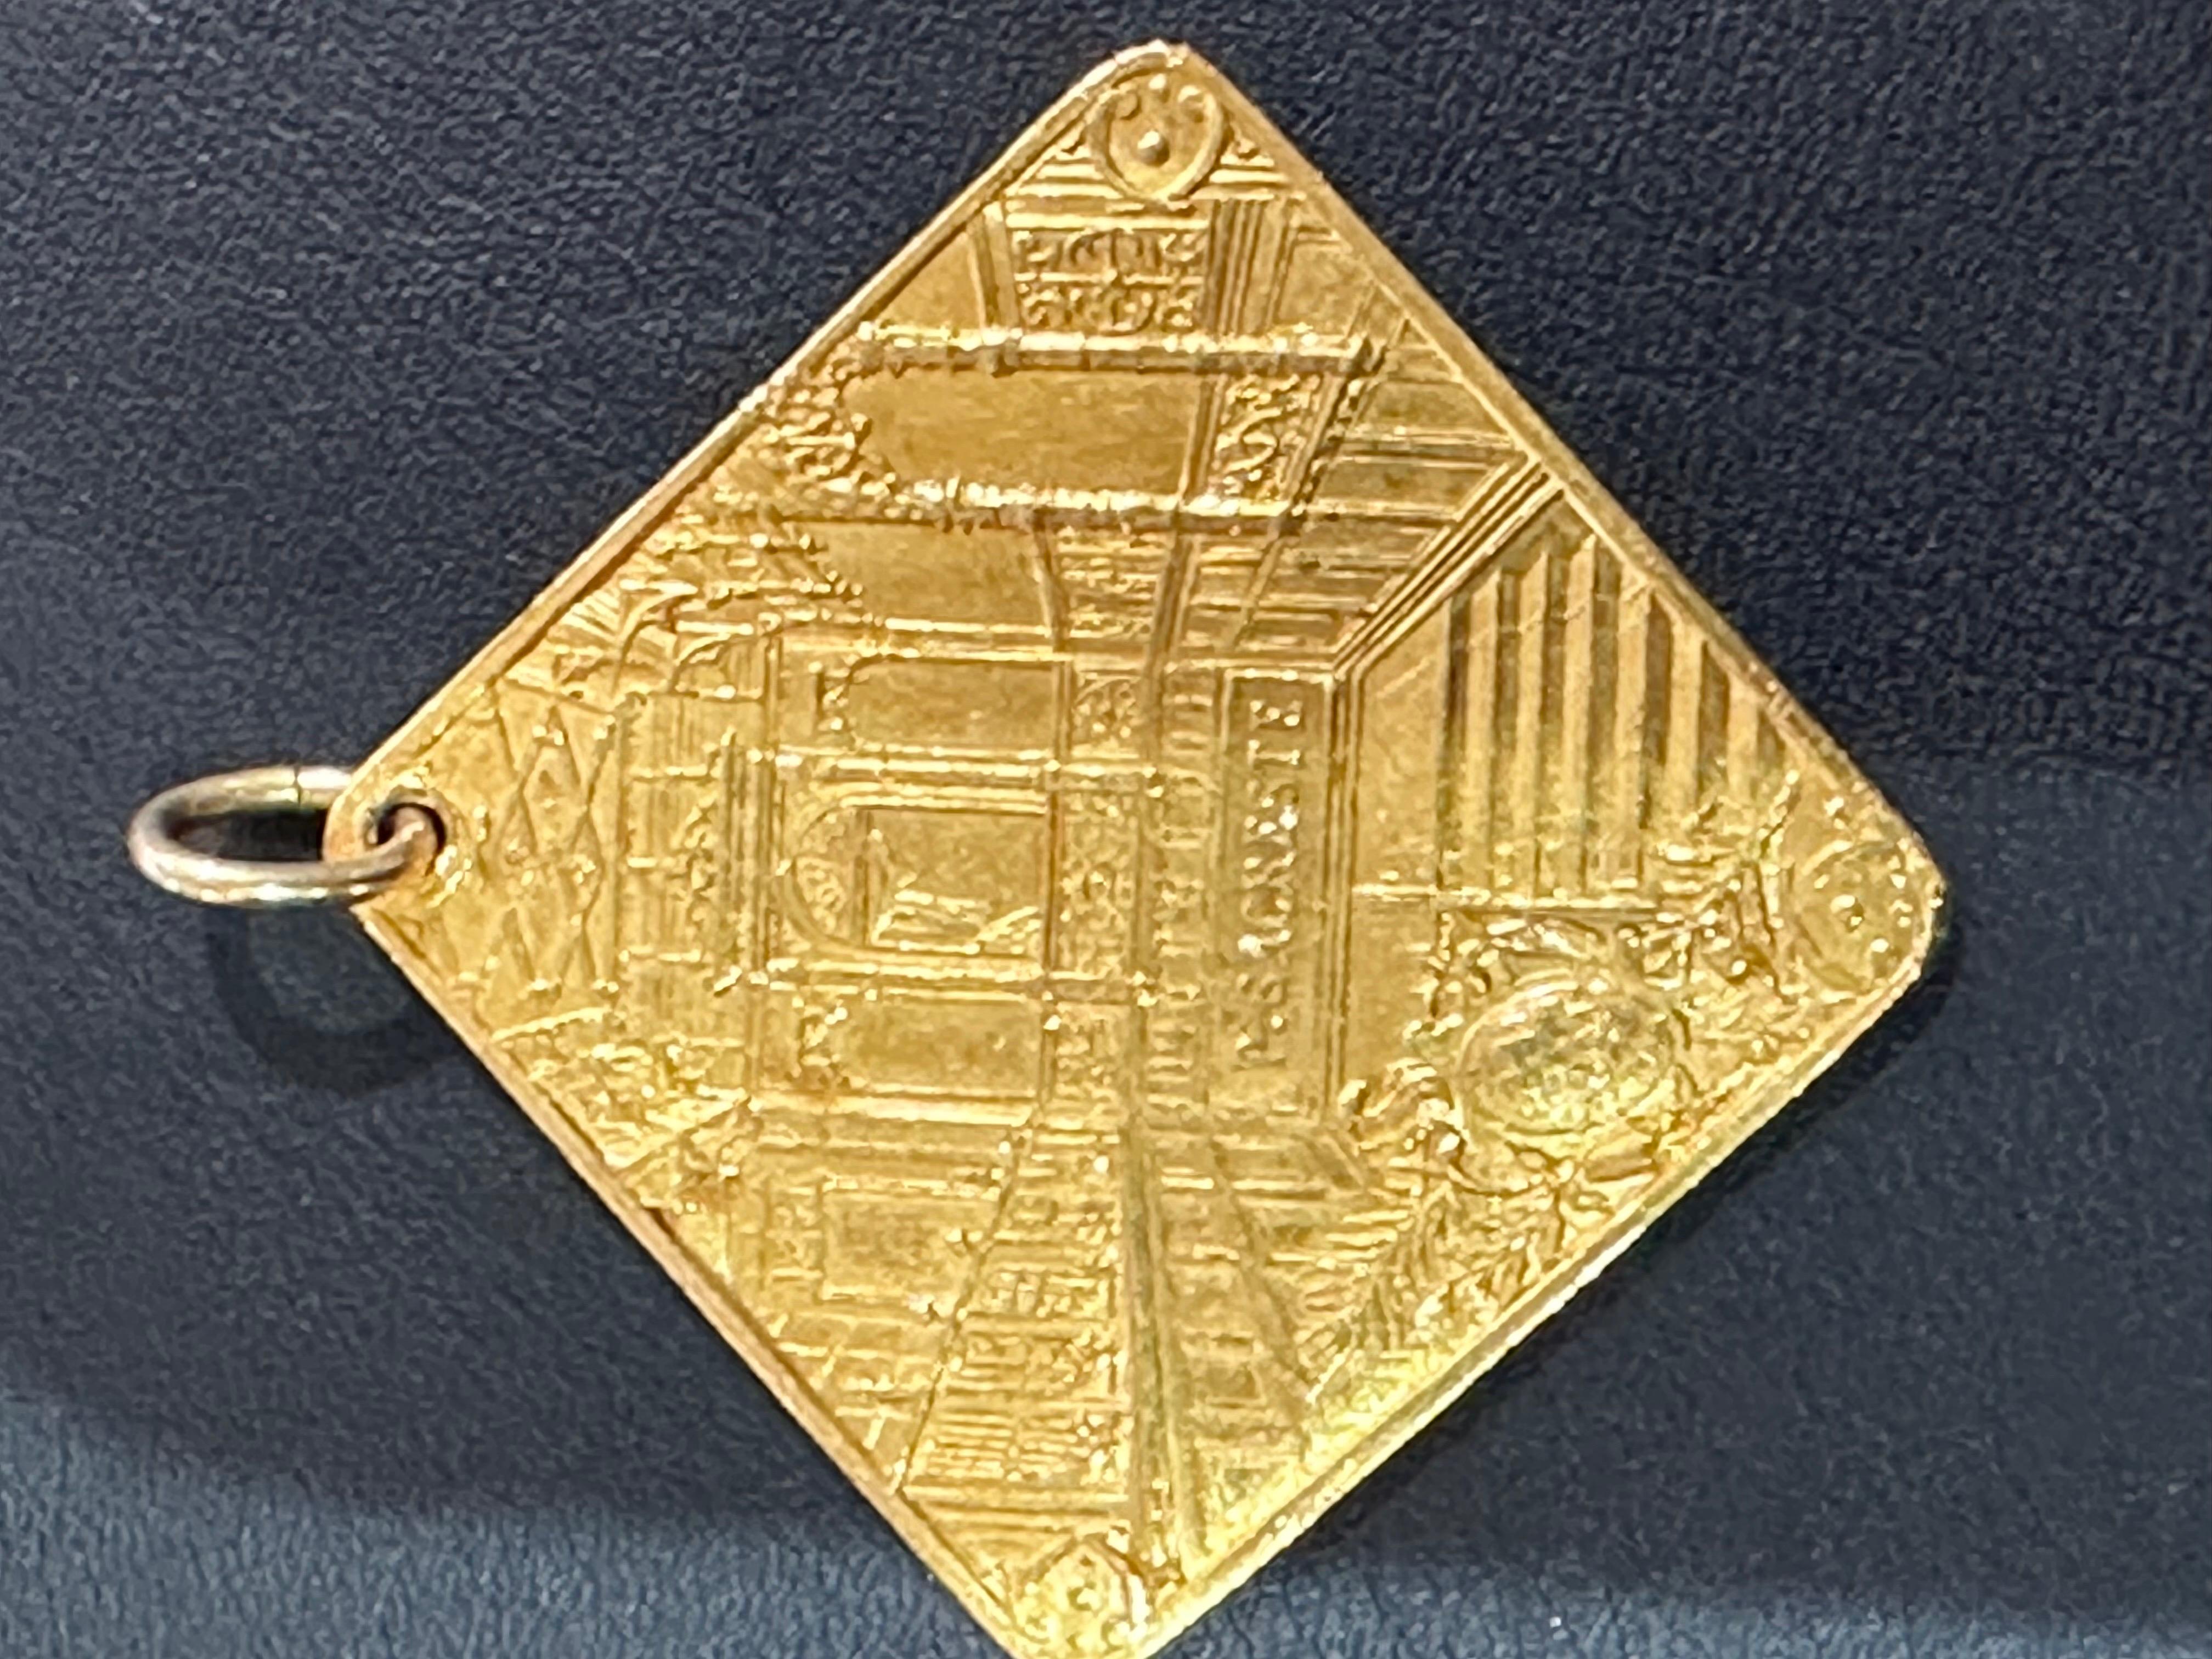 Honorary Medal in 18-carat Yellow Gold in Portois House
18-carat Yellow Gold Honorary Medal

Square-shaped medal representing two men named: A.PORTOIS. and A.FIX their portrait is very finely chiseled. On the other side a staircase decor framed by a